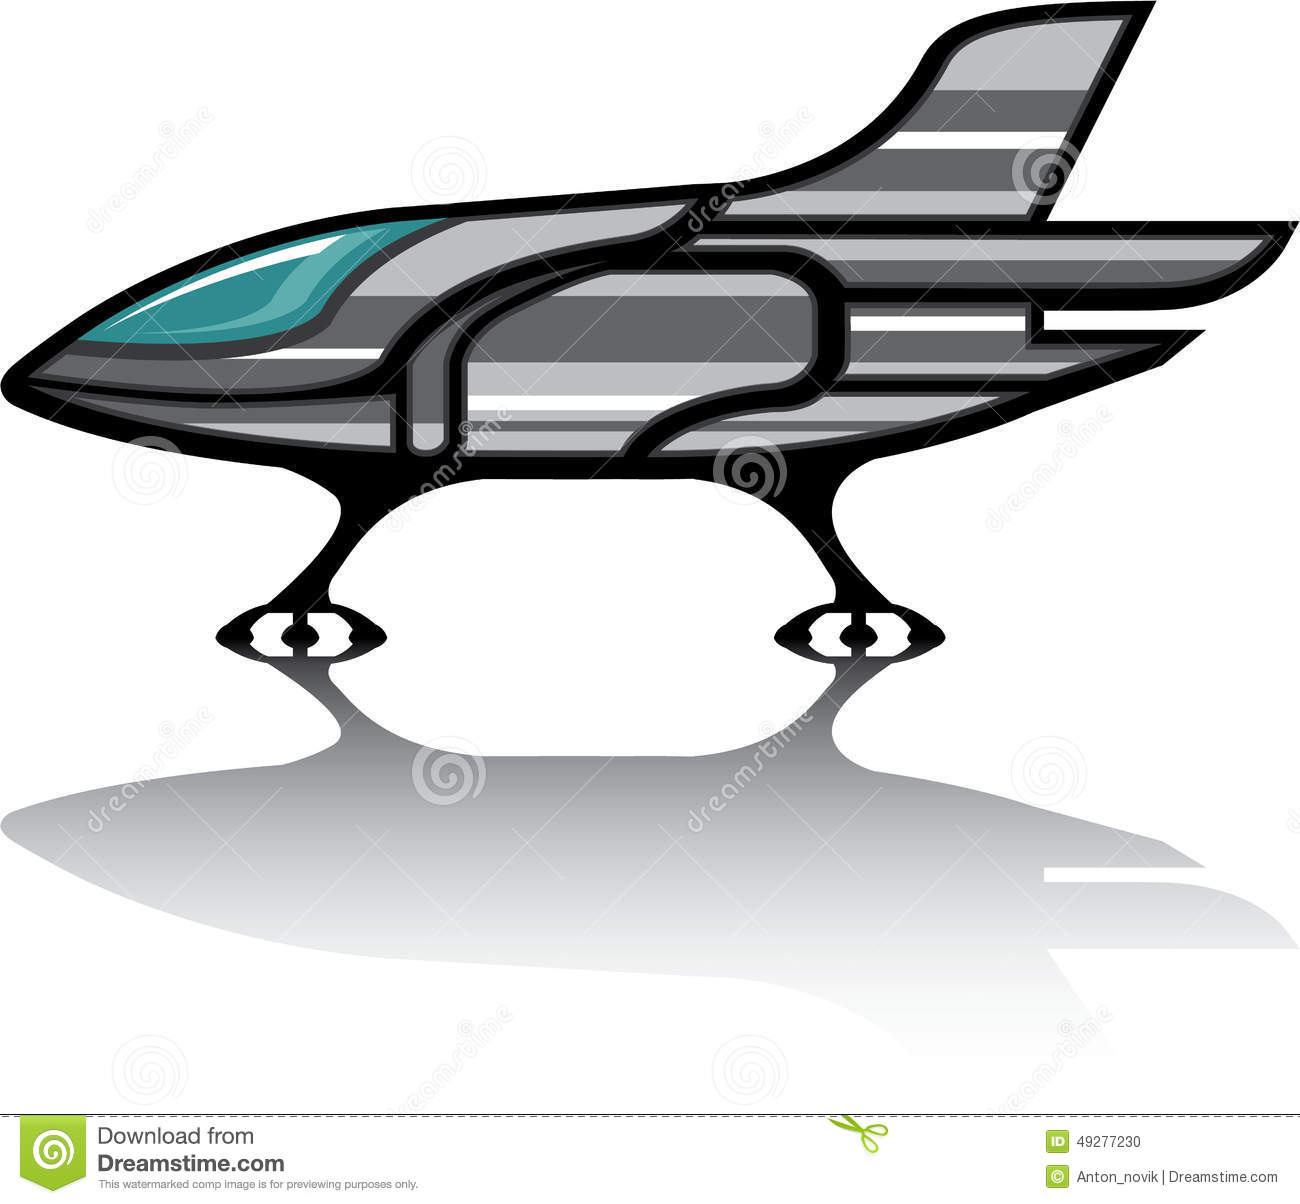 Starship clipart #8, Download drawings